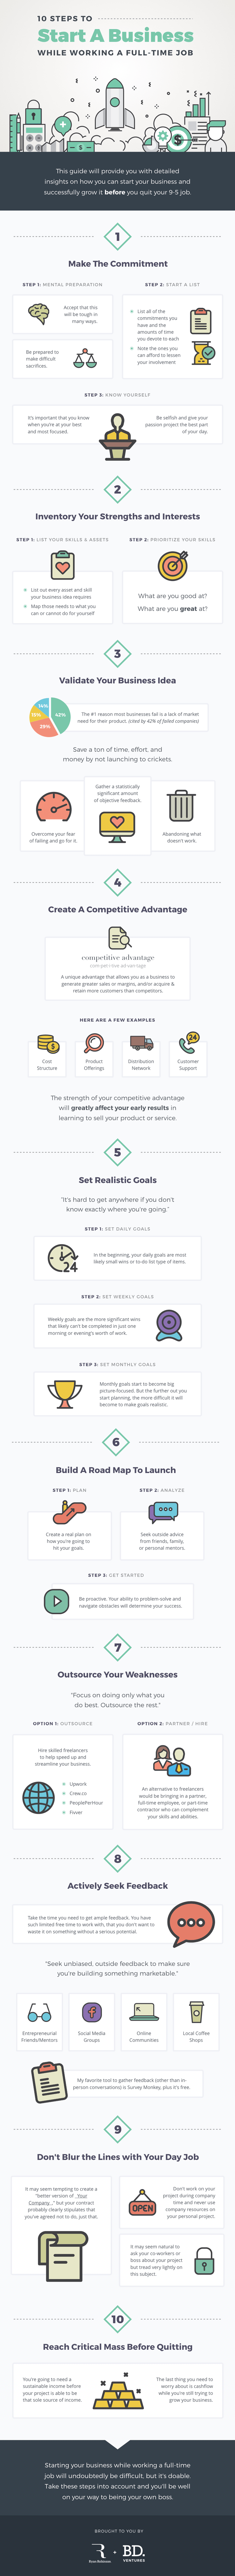 10 Steps To Start A Business While Working Full Time #Infographic